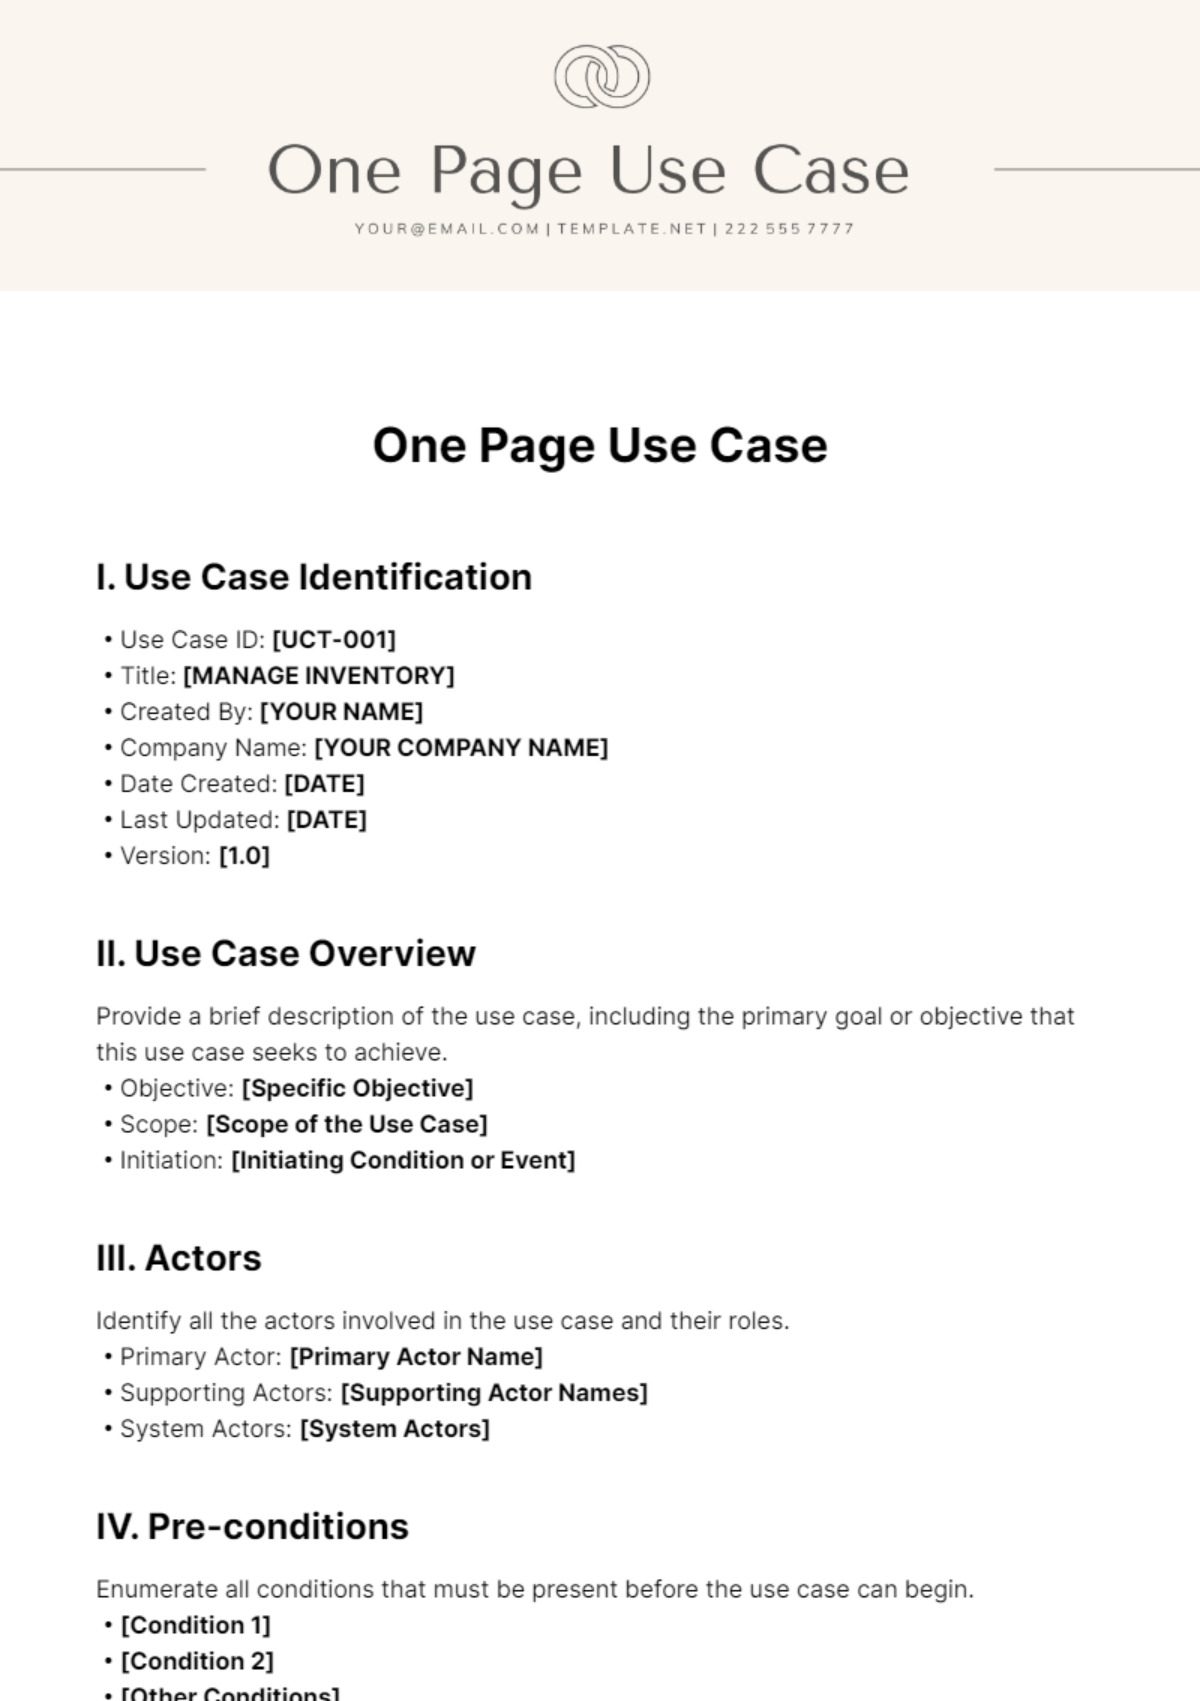 One Page Use Case Template